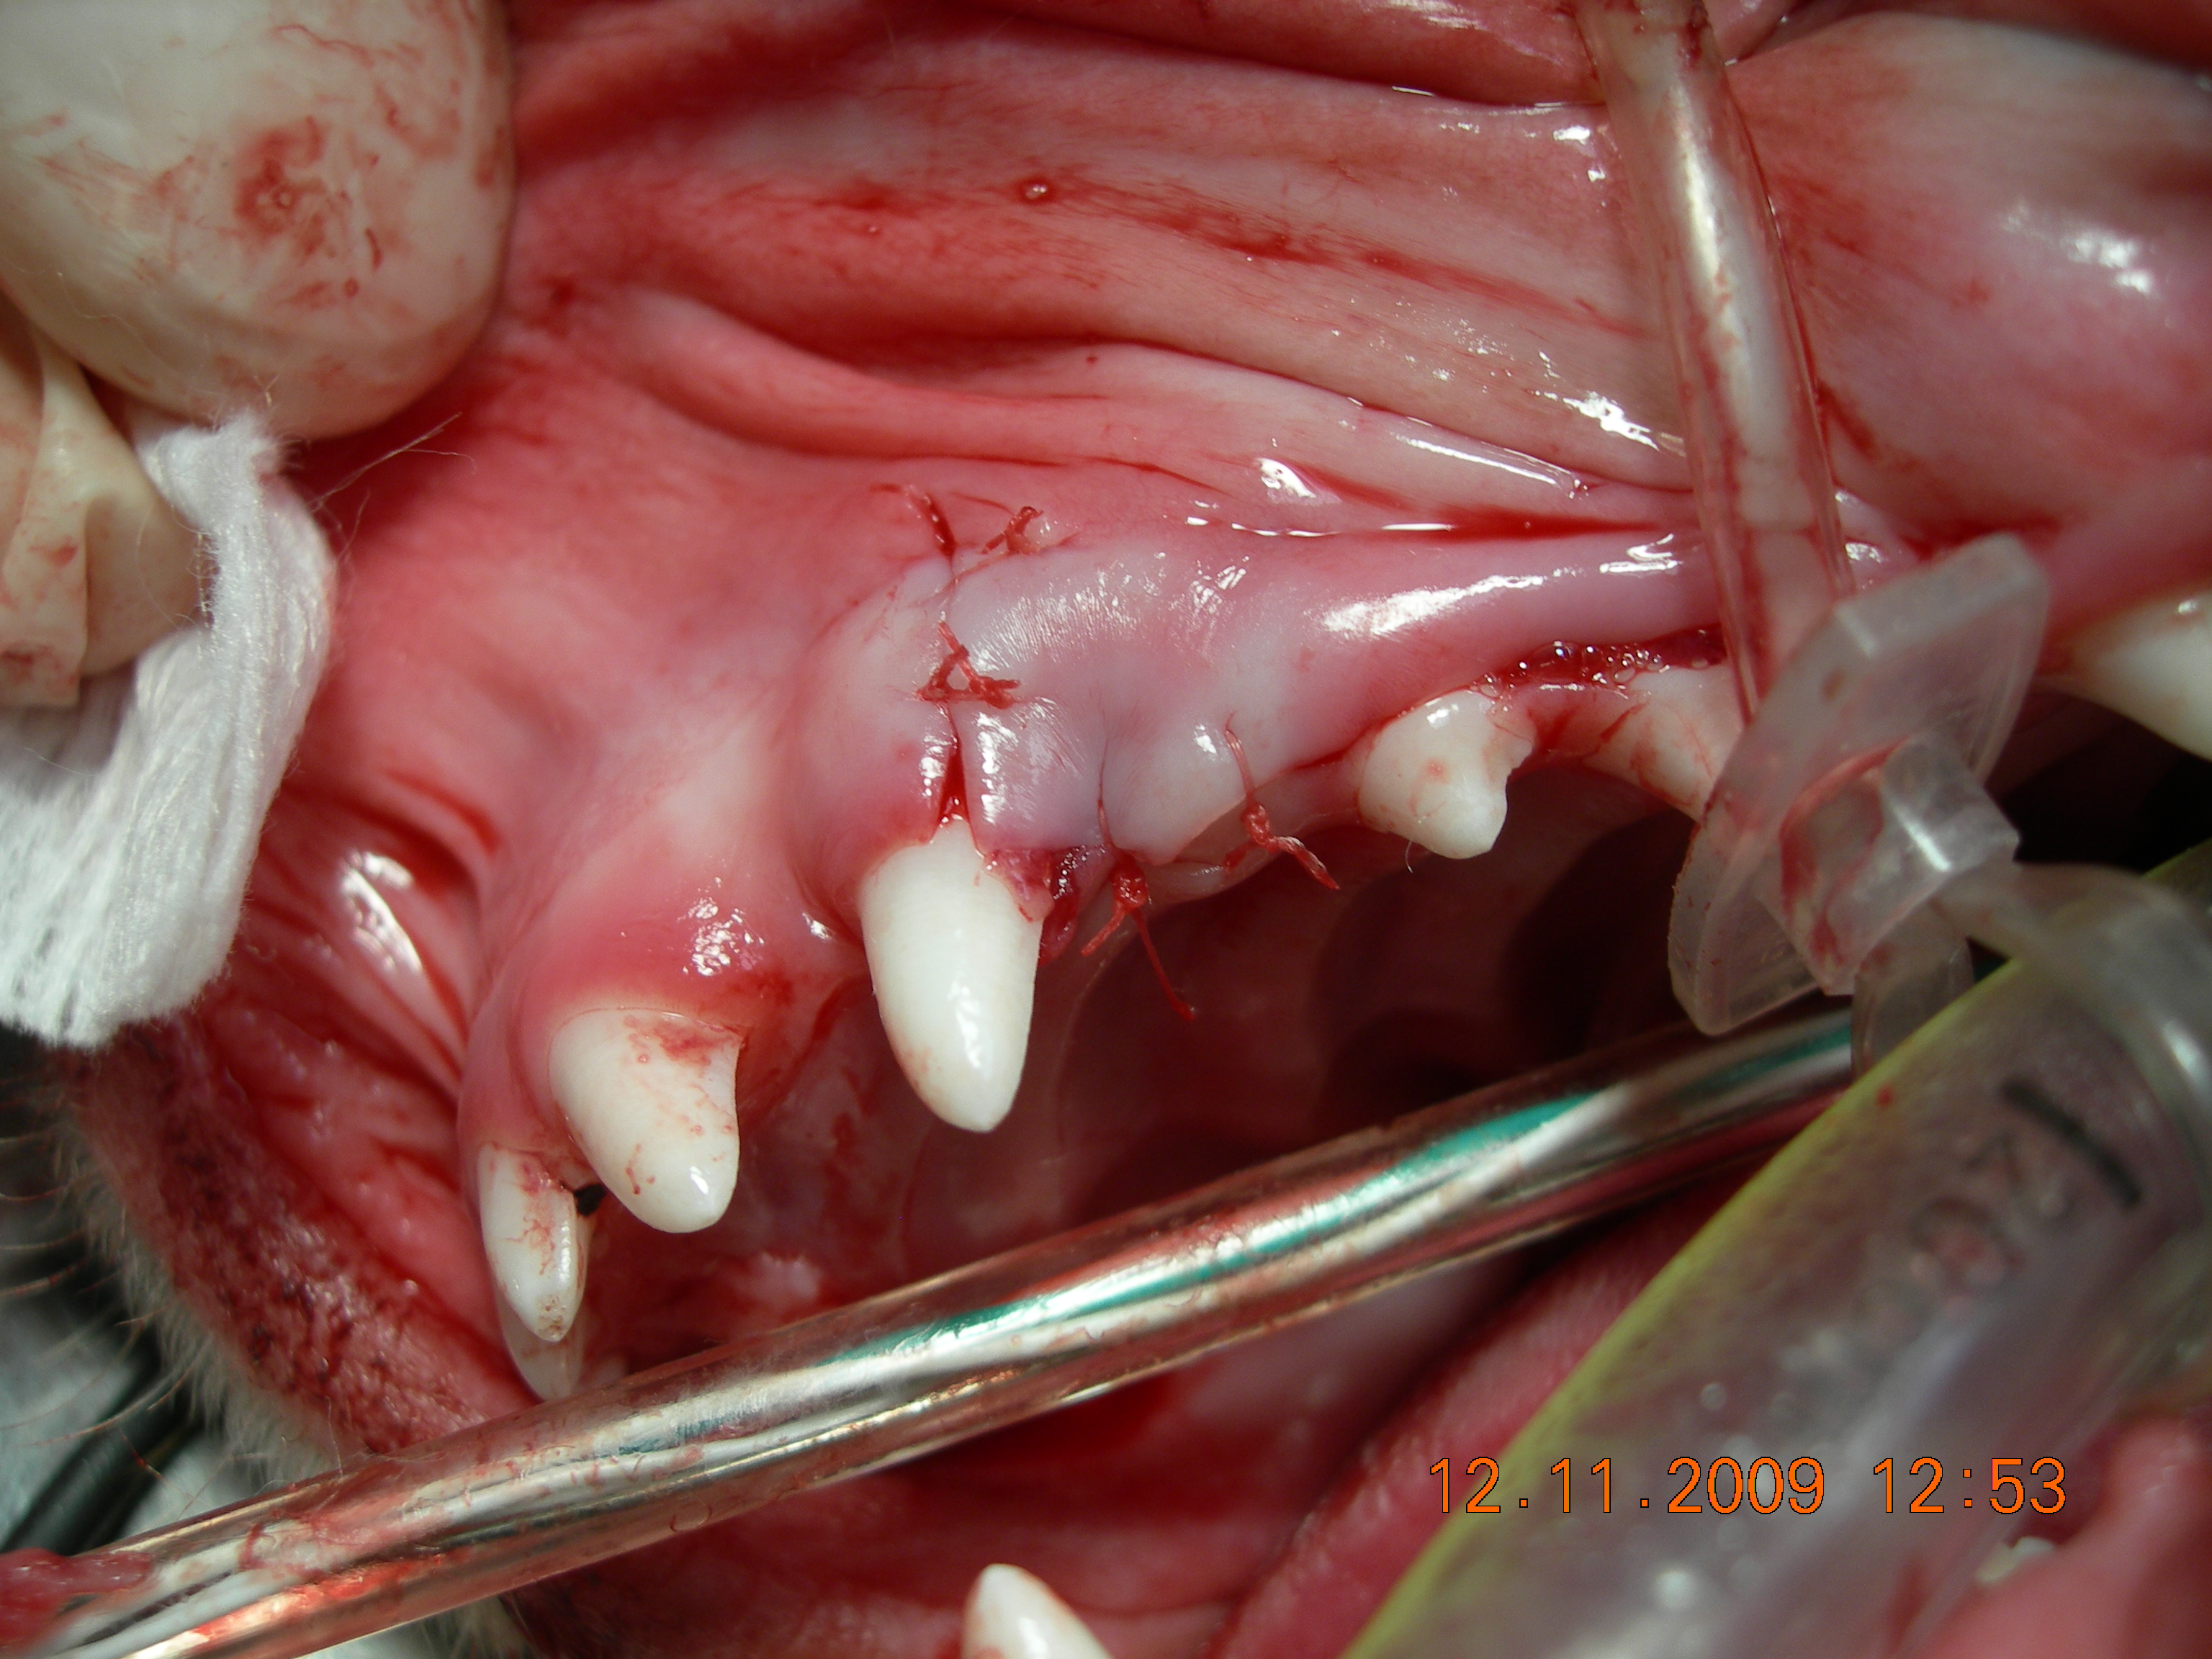 Surgical extraction required, in process of suturing gum flap back in place